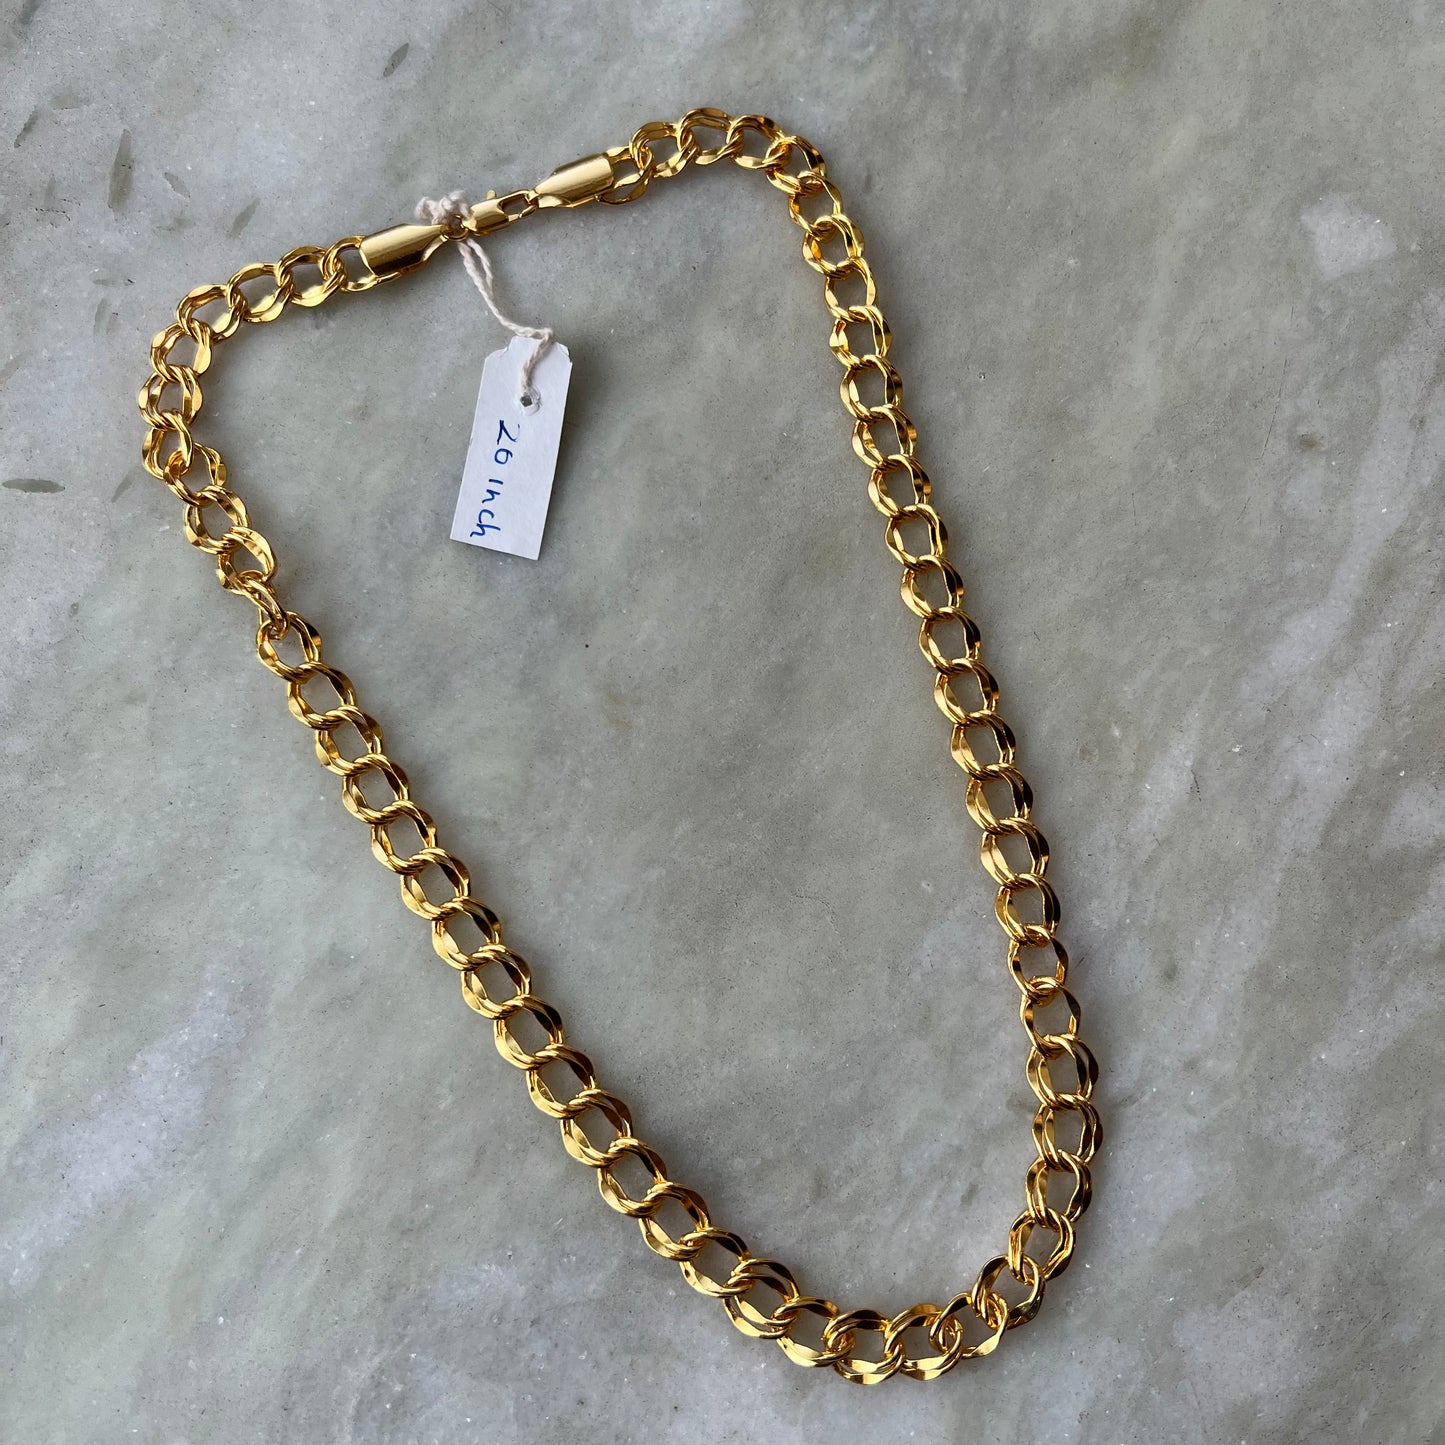 Gold Chain for Men (20 Inch Long)